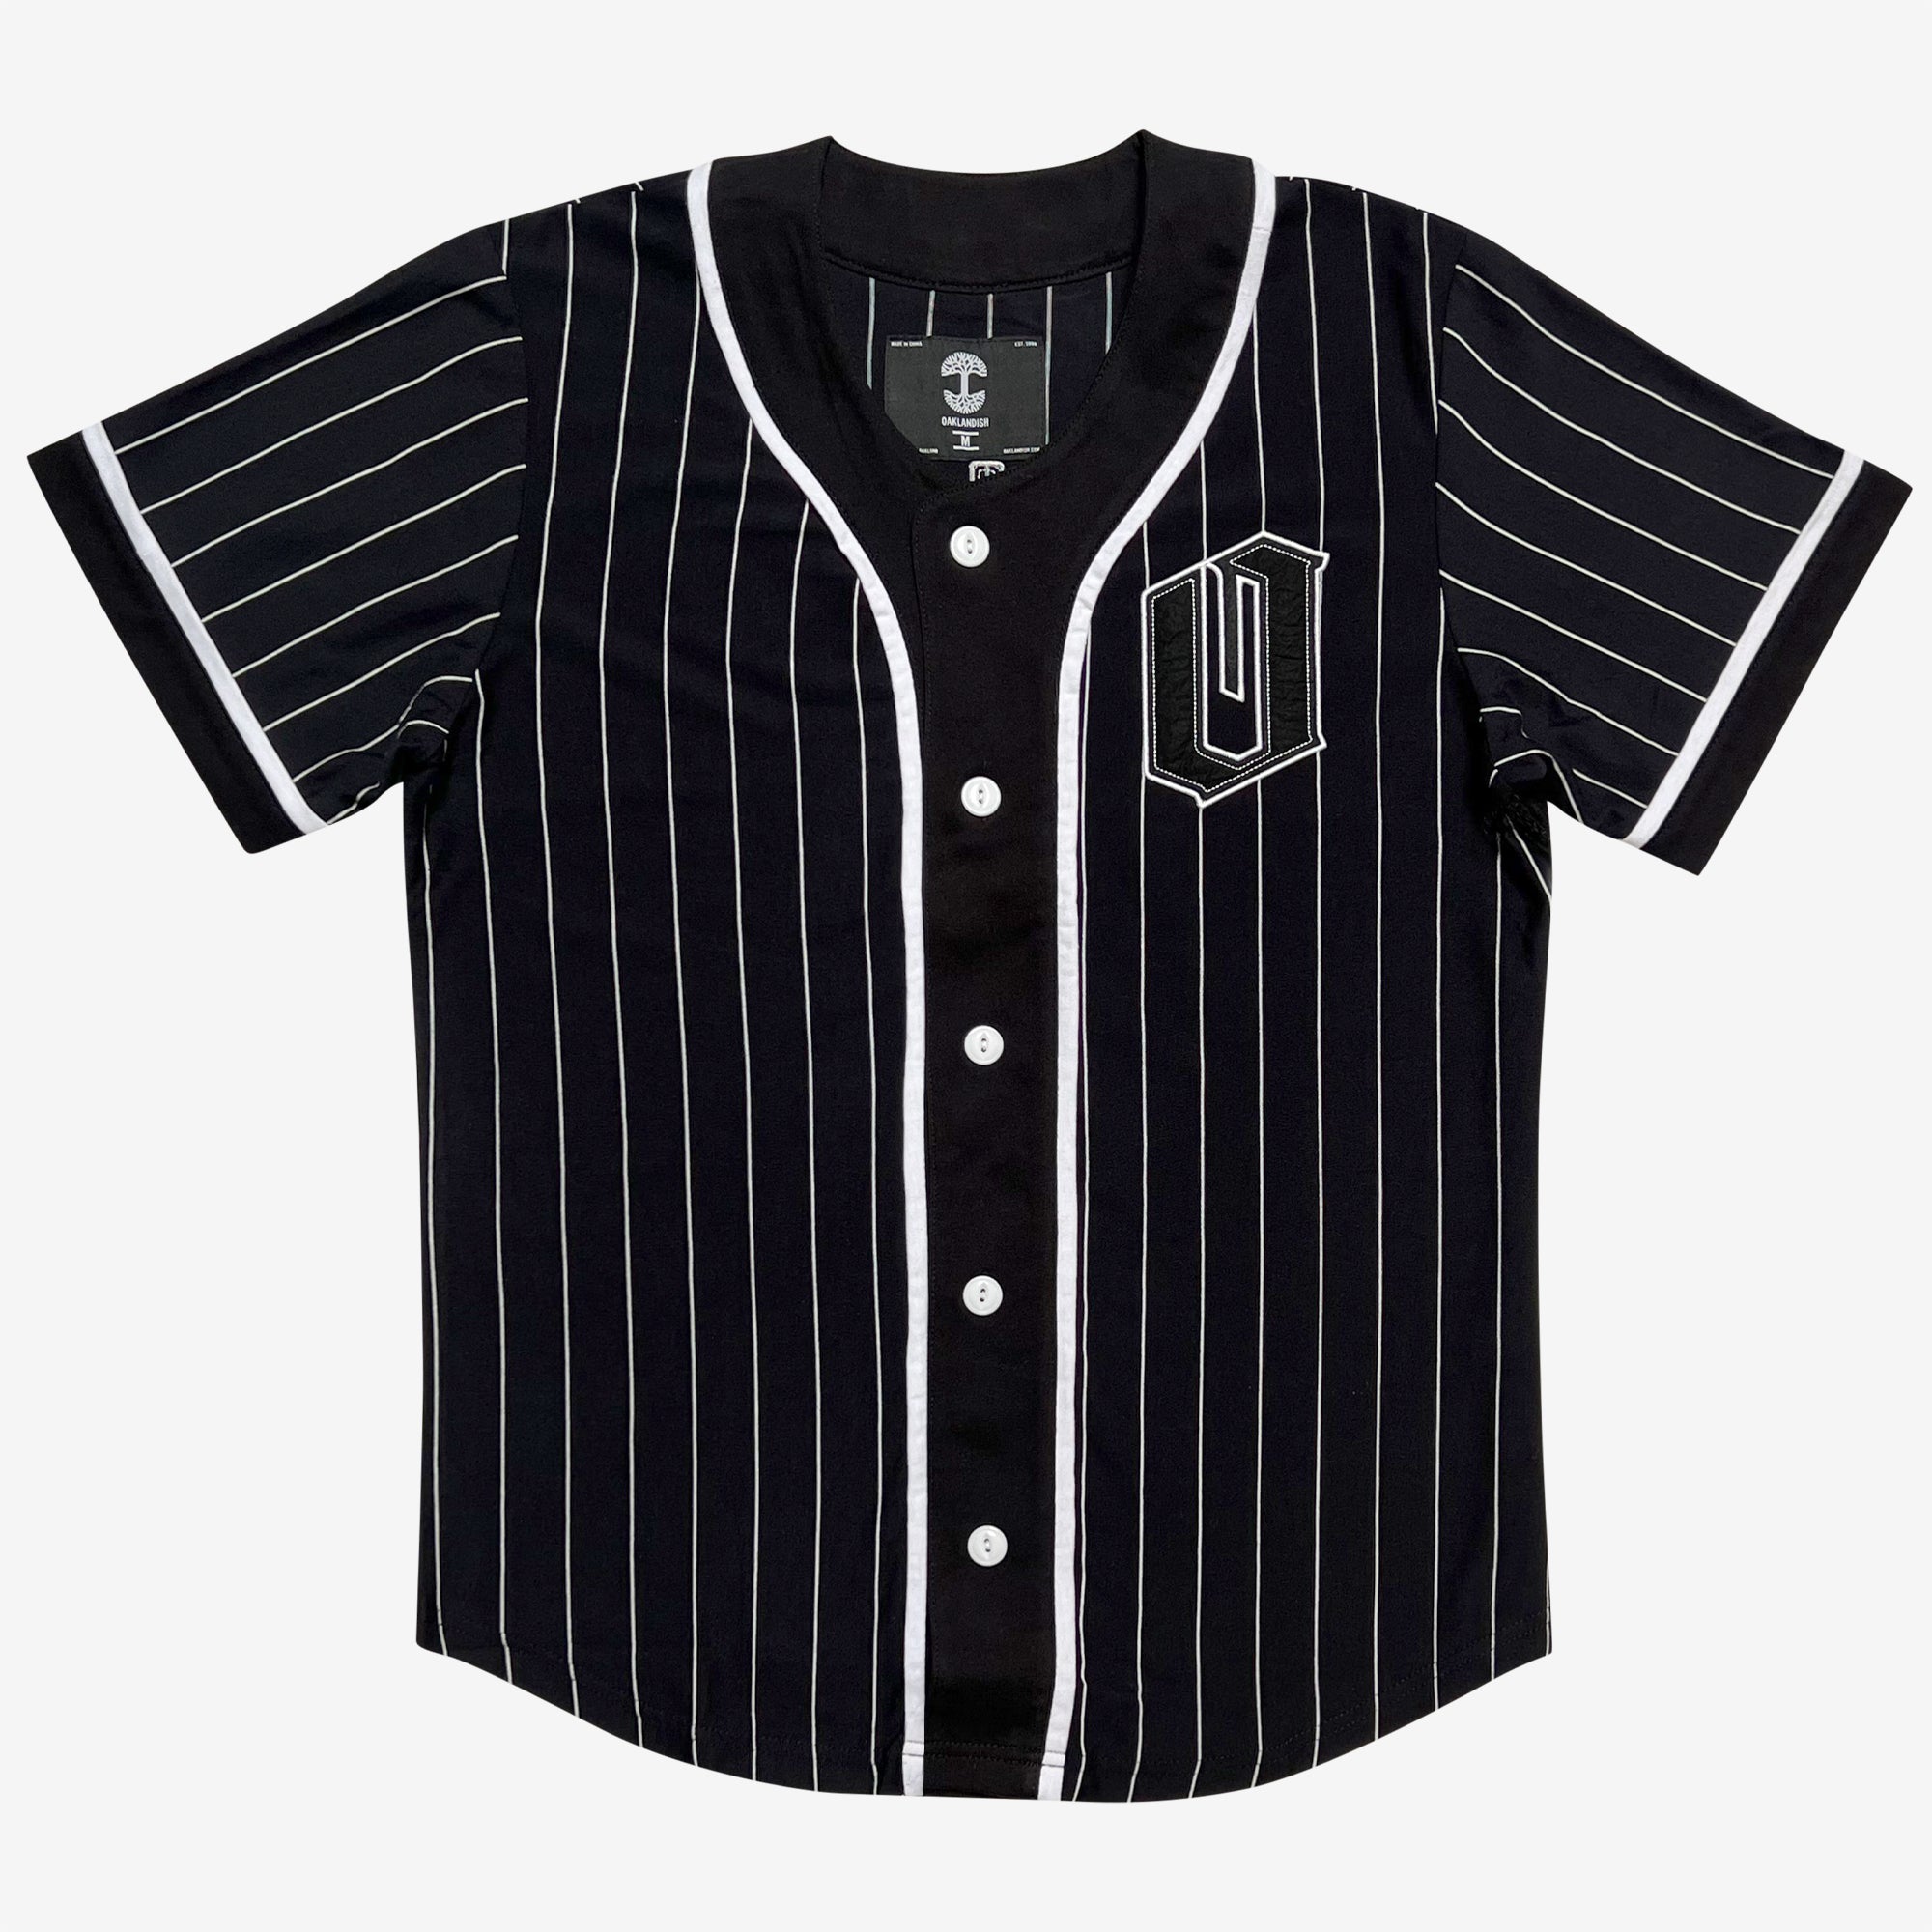 Oaklandish Football Jersey - Official Away, O for Oakland, Boxy Mesh, Black X-Large / Black